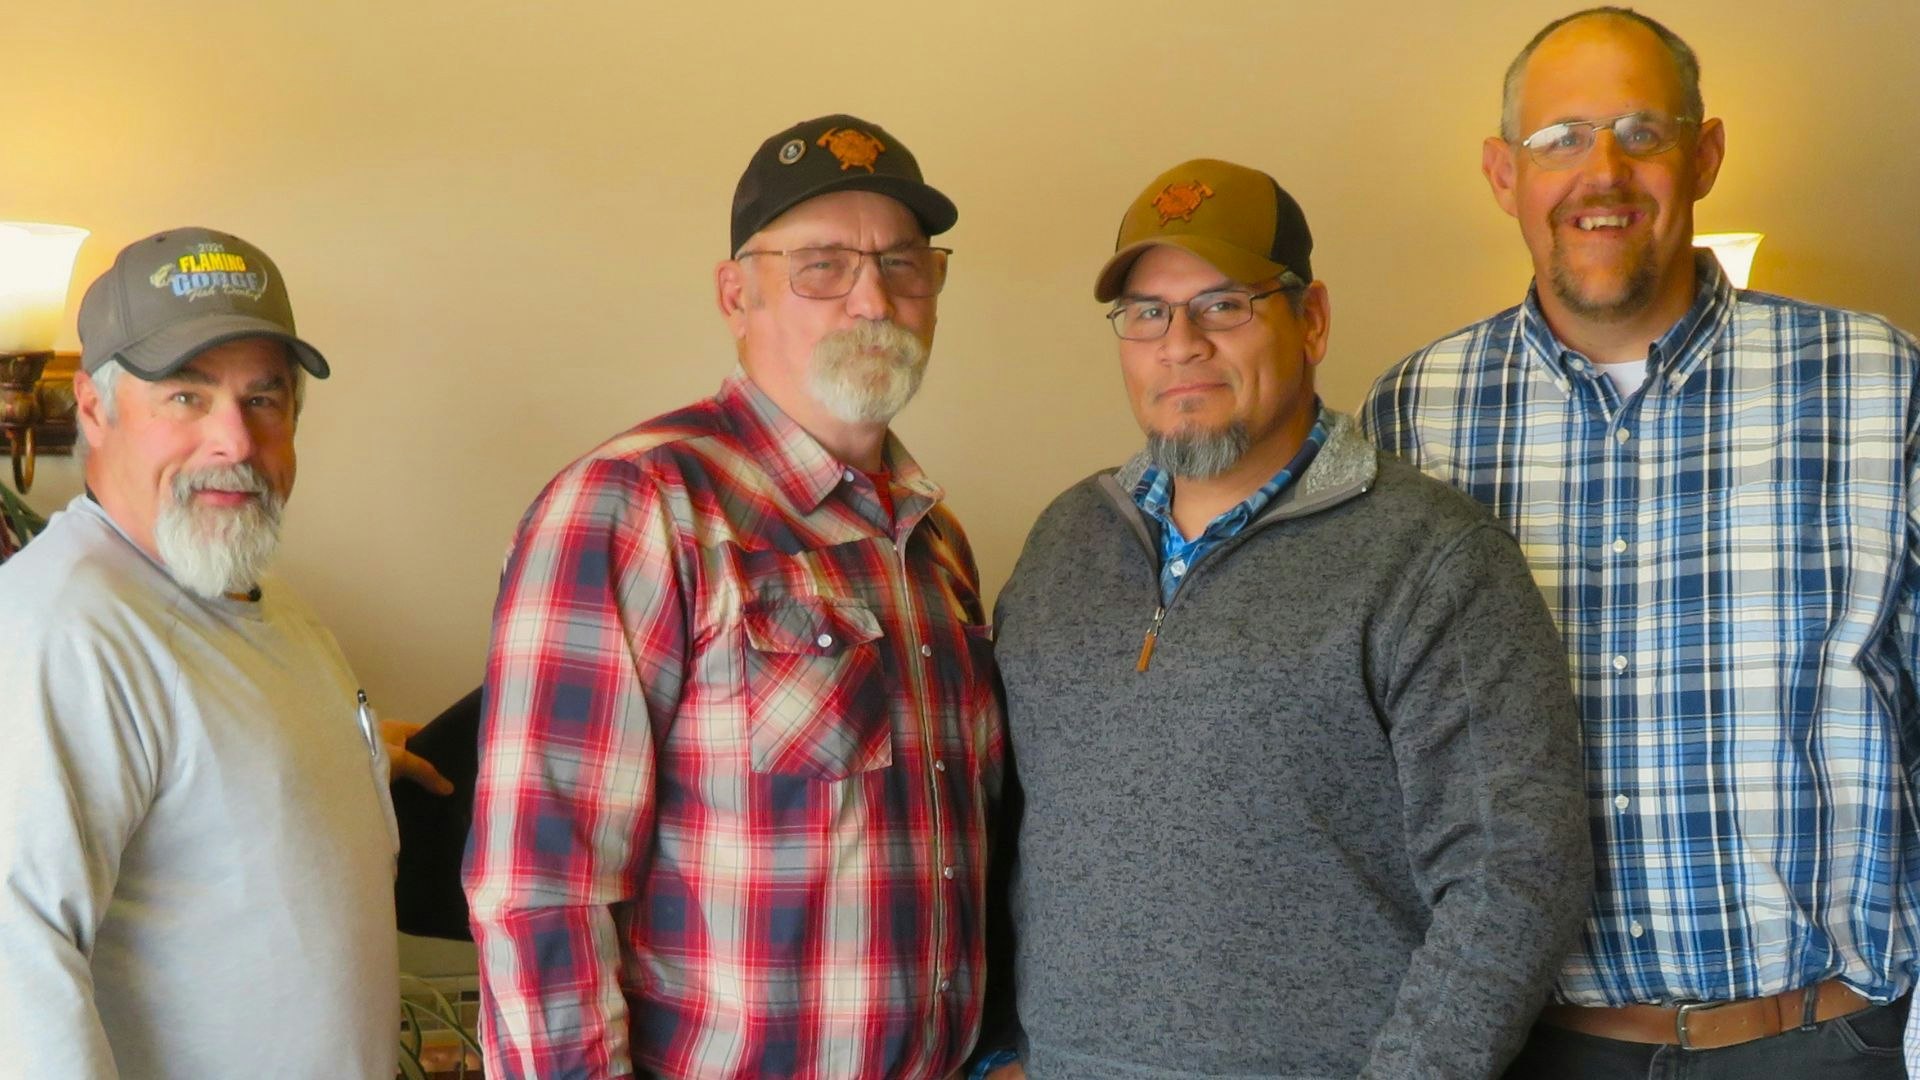 Wyoming Department of Transportation workers, from left, Craig Brown, Fred Sherburne, Catarino Zapata and Logan Whipple were recently recognized for their heroic actions saving a man from a suicide attempt in January.